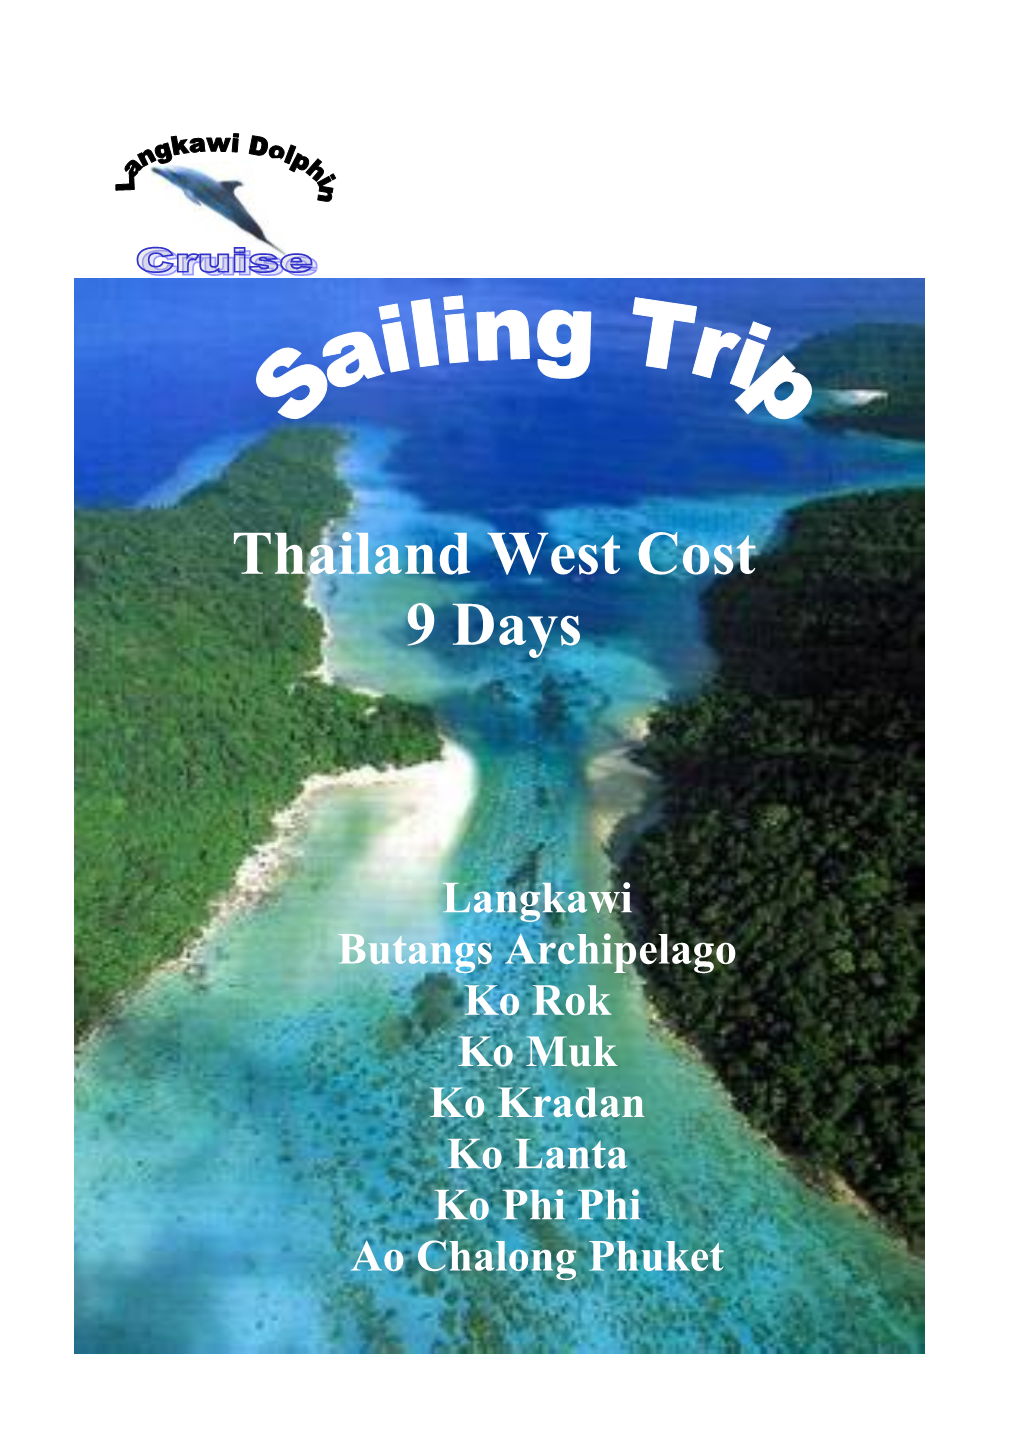 Trip from Langkawi to Ao Chalong Phuketthailand with LIBRAN SONG